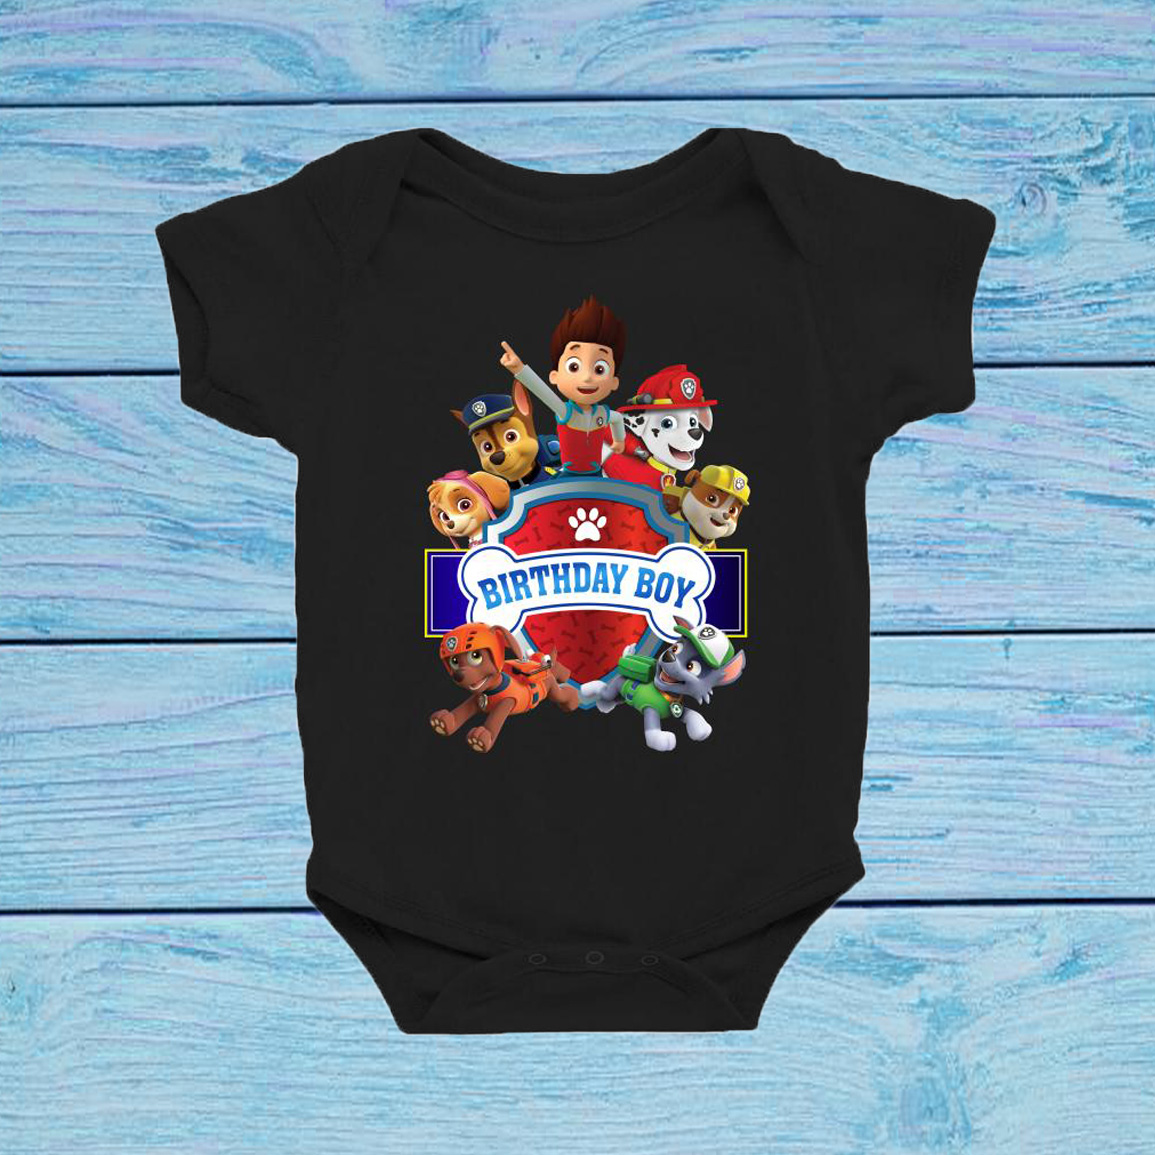 Cute Paw Patrol Baby Onesie - Custom Baby Onesie - Cute Paw trol Baby Suit - New Born Gift - Baby Shower Gift - Gift for Baby - Funny Animal